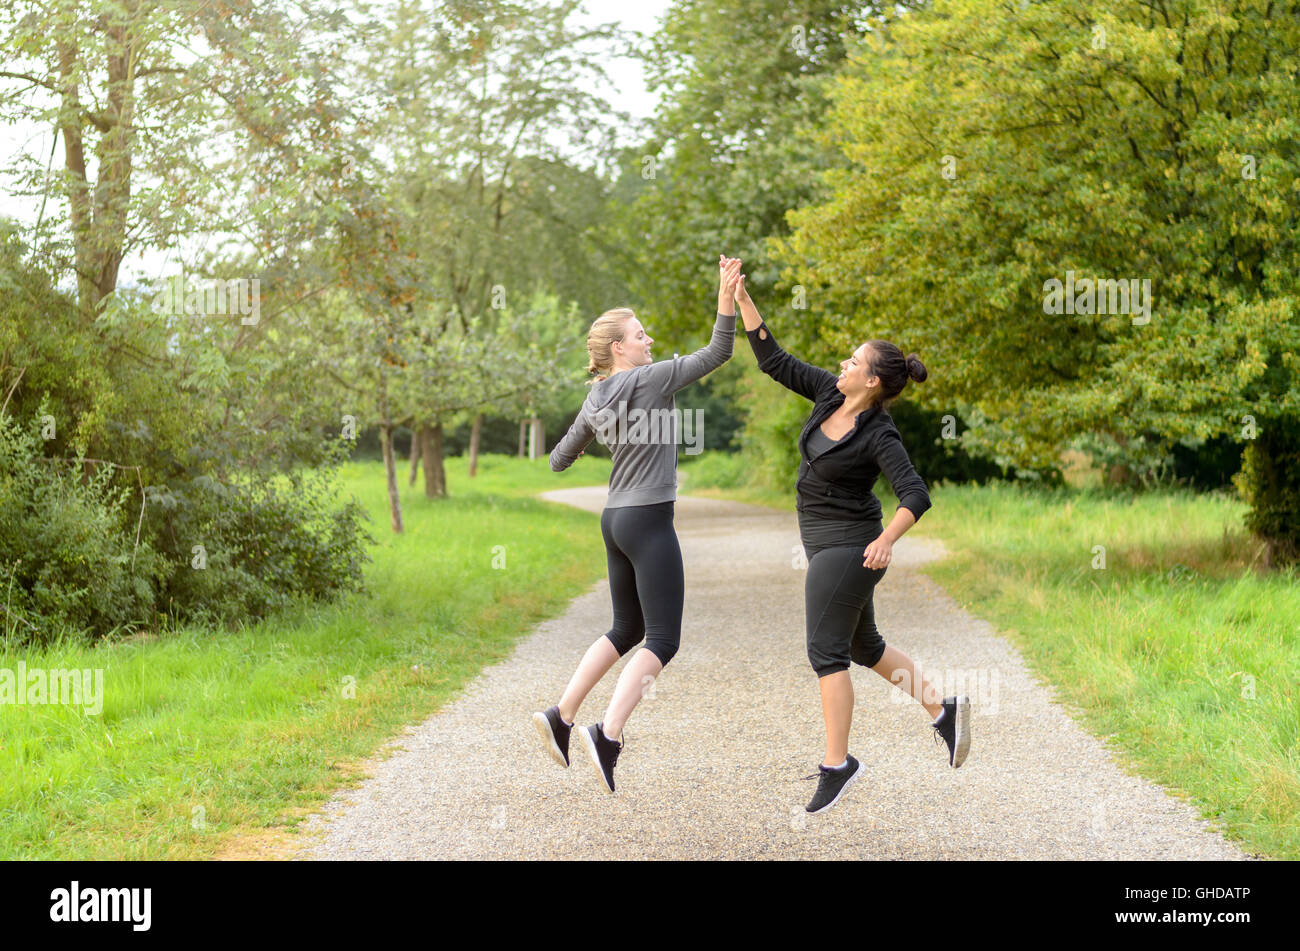 Pair of happy jumping women in workout clothes congratulating each other by slapping palms in mid air over running path Stock Photo